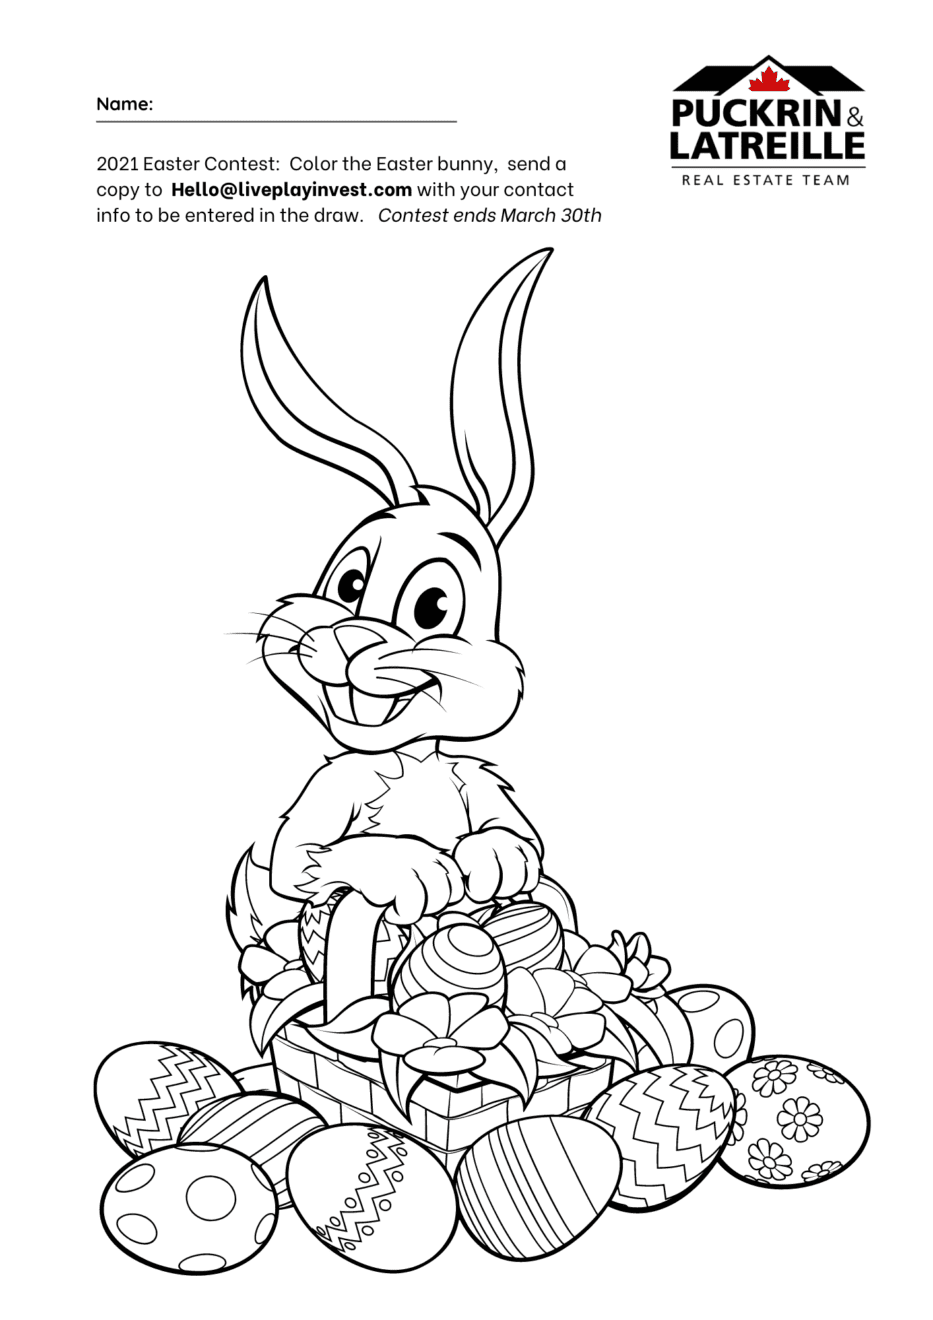 2021 Puckrin Easter colouring contest